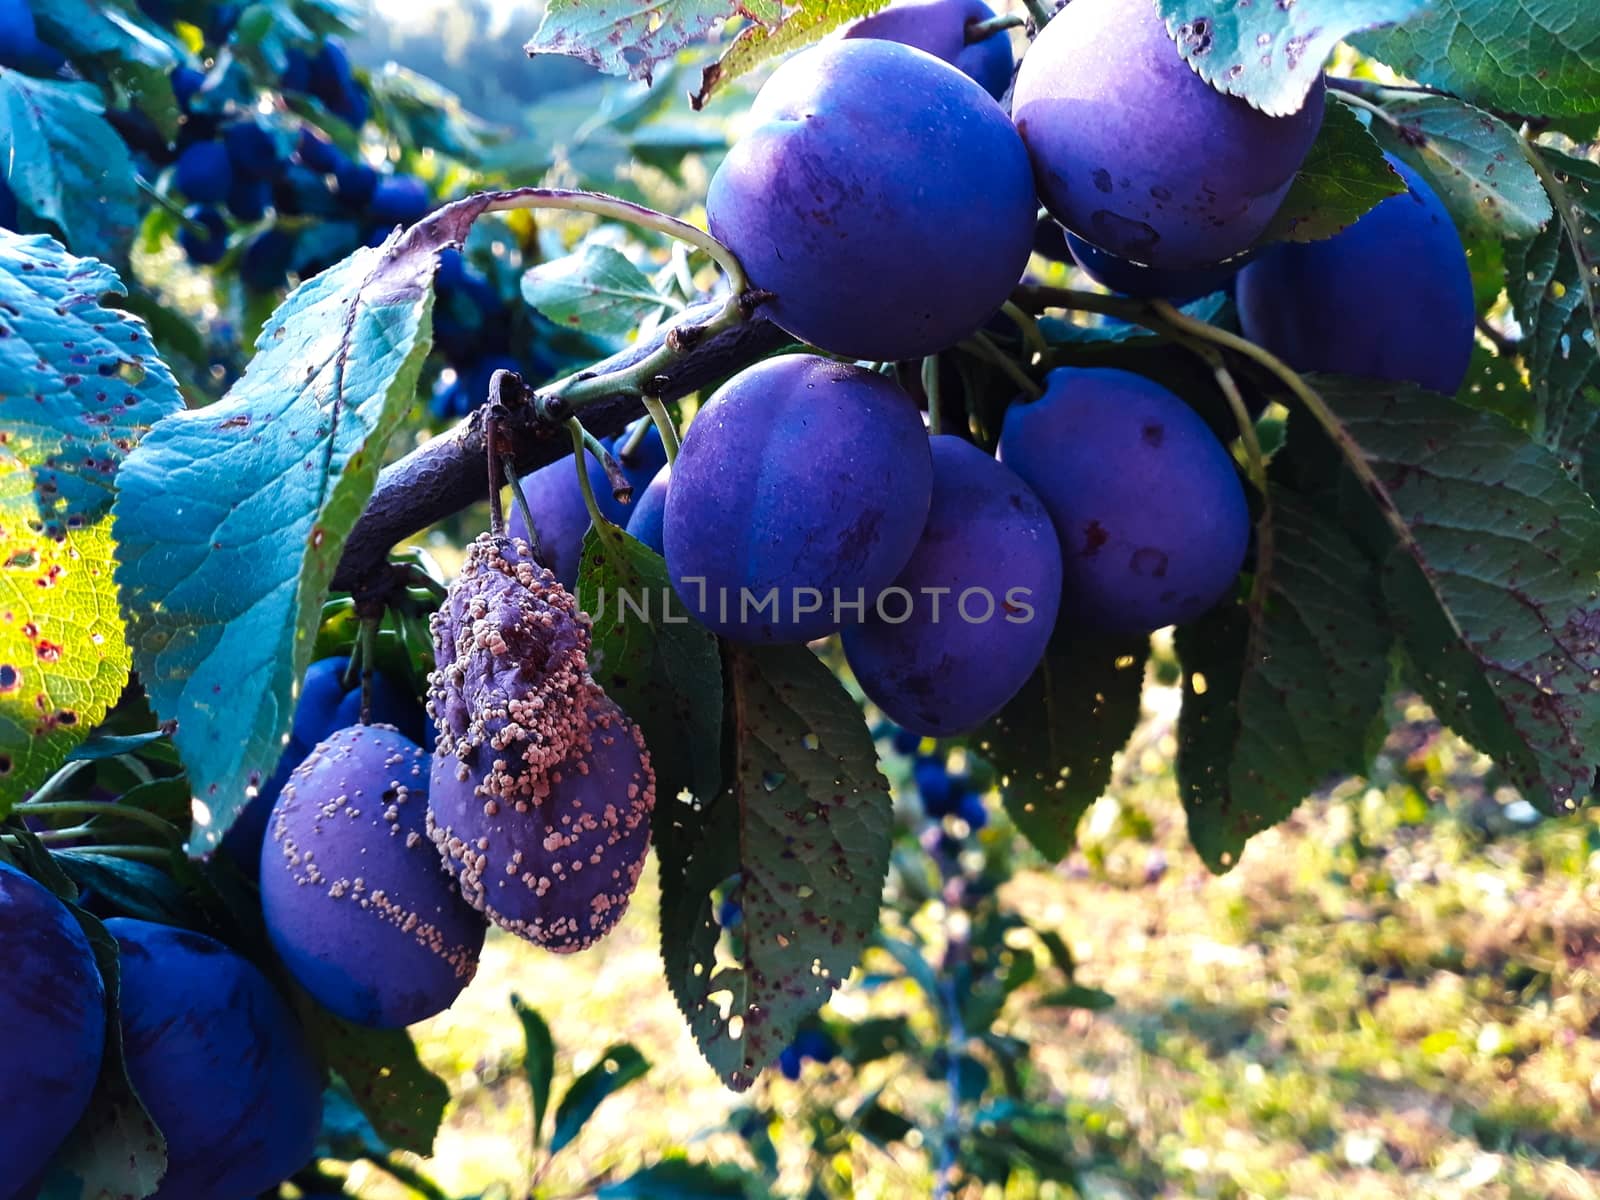 The group of the plums began to rot on the branch. Zavidovici, Bosnia and Herzegovina.